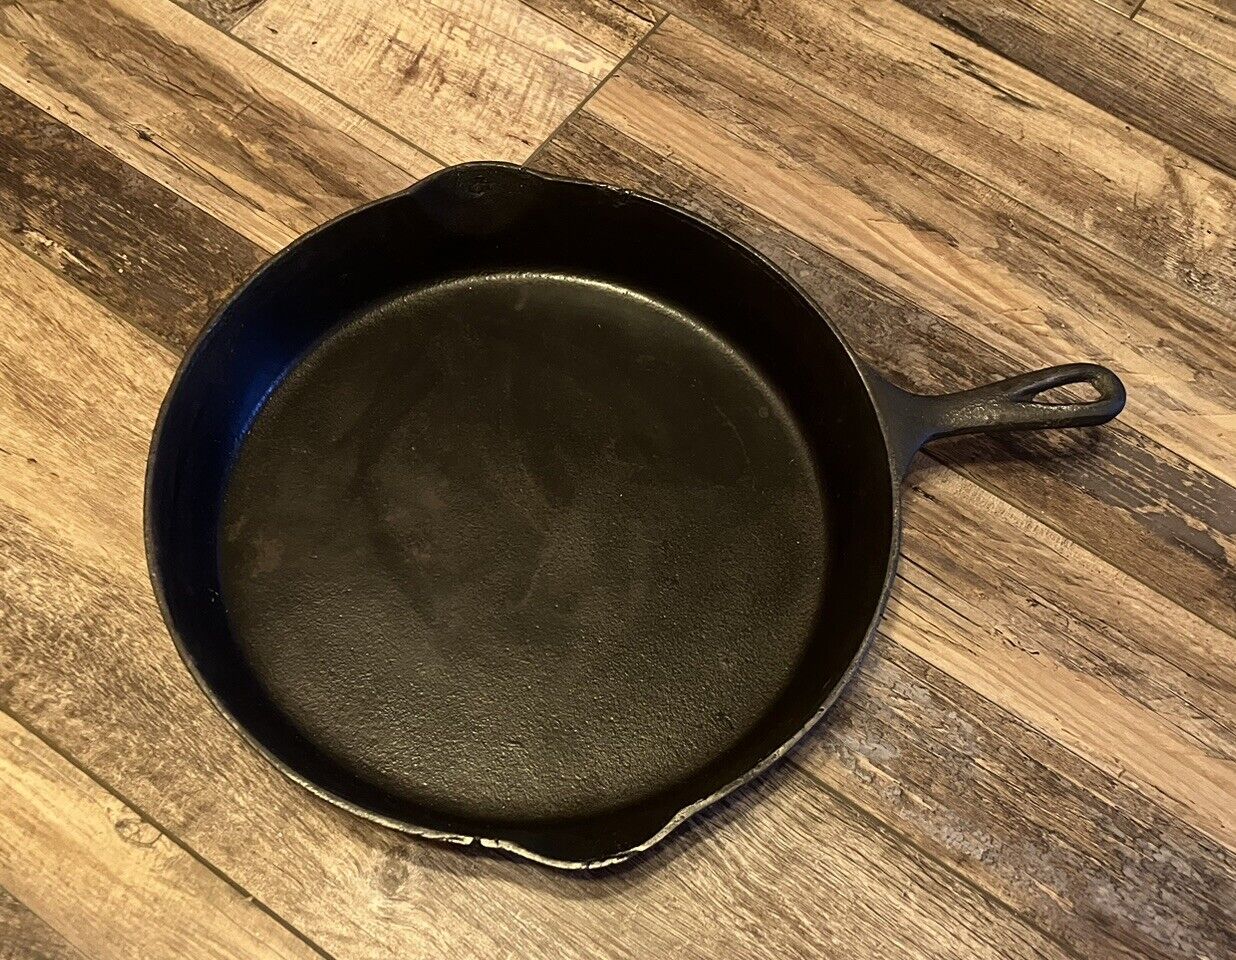 Pre Griswold Erie 1st Series #12 Cast Iron Skillet Circa 1860s-80s 🔥🔥🔥